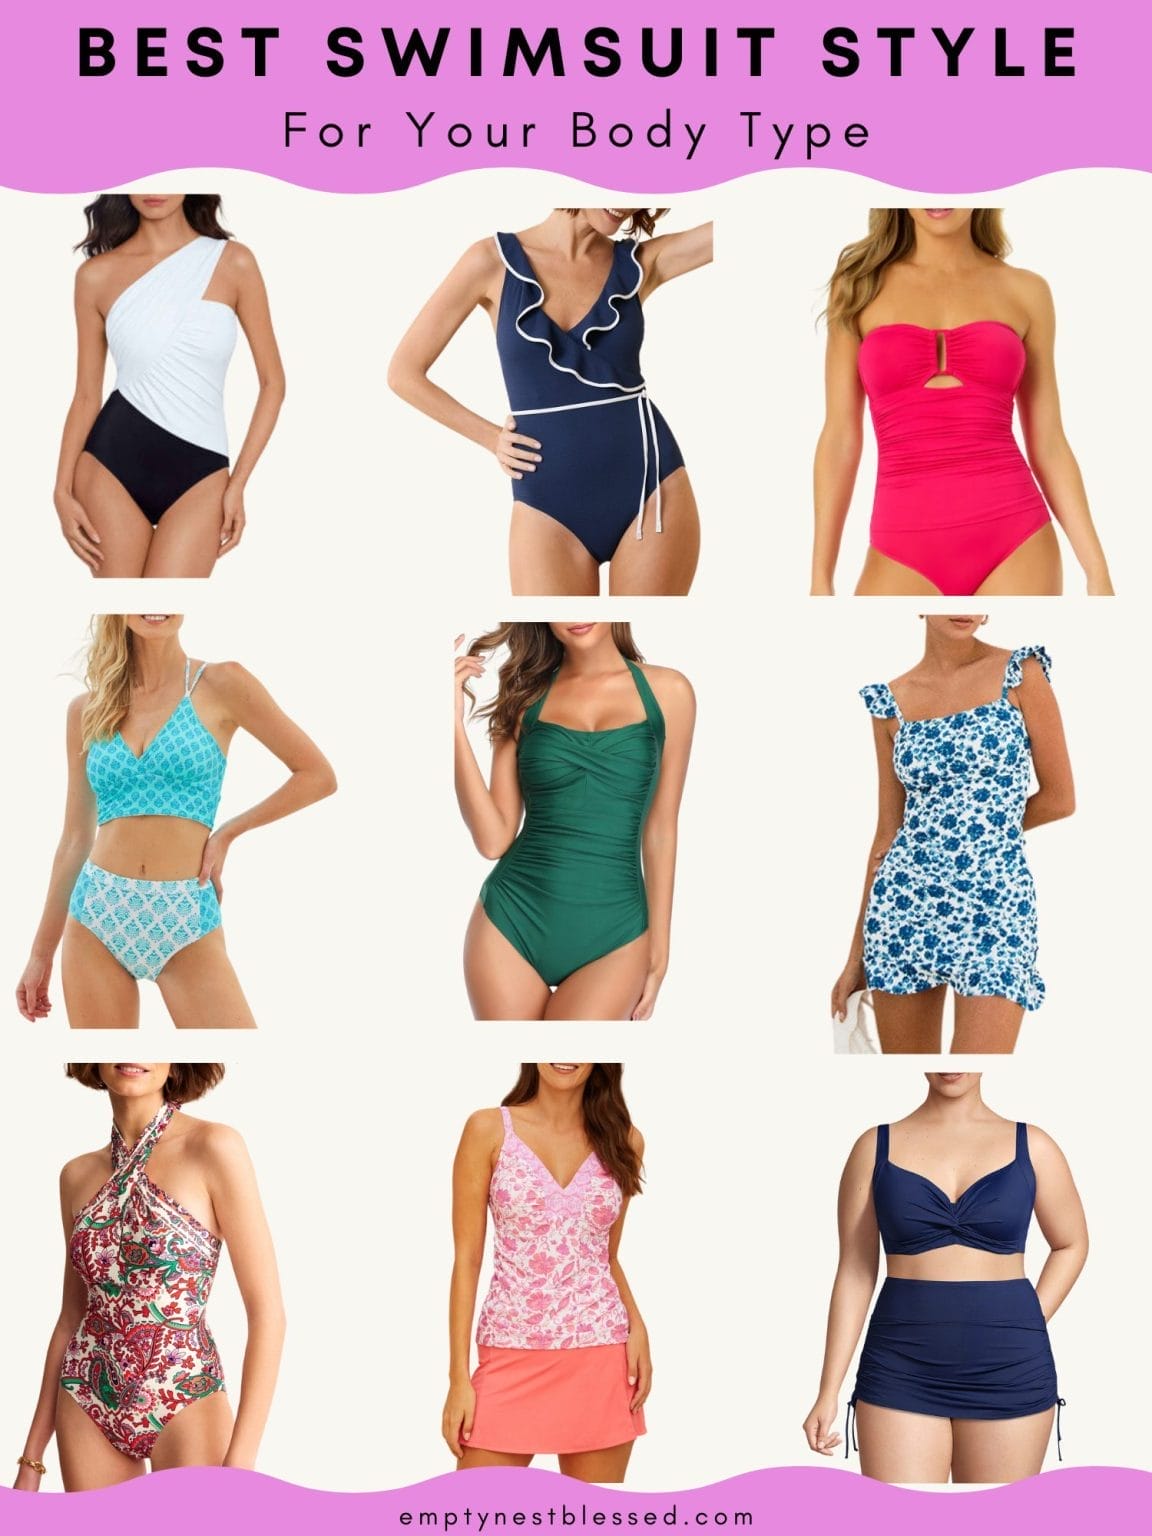 Collage of best swimsuit style for different body types